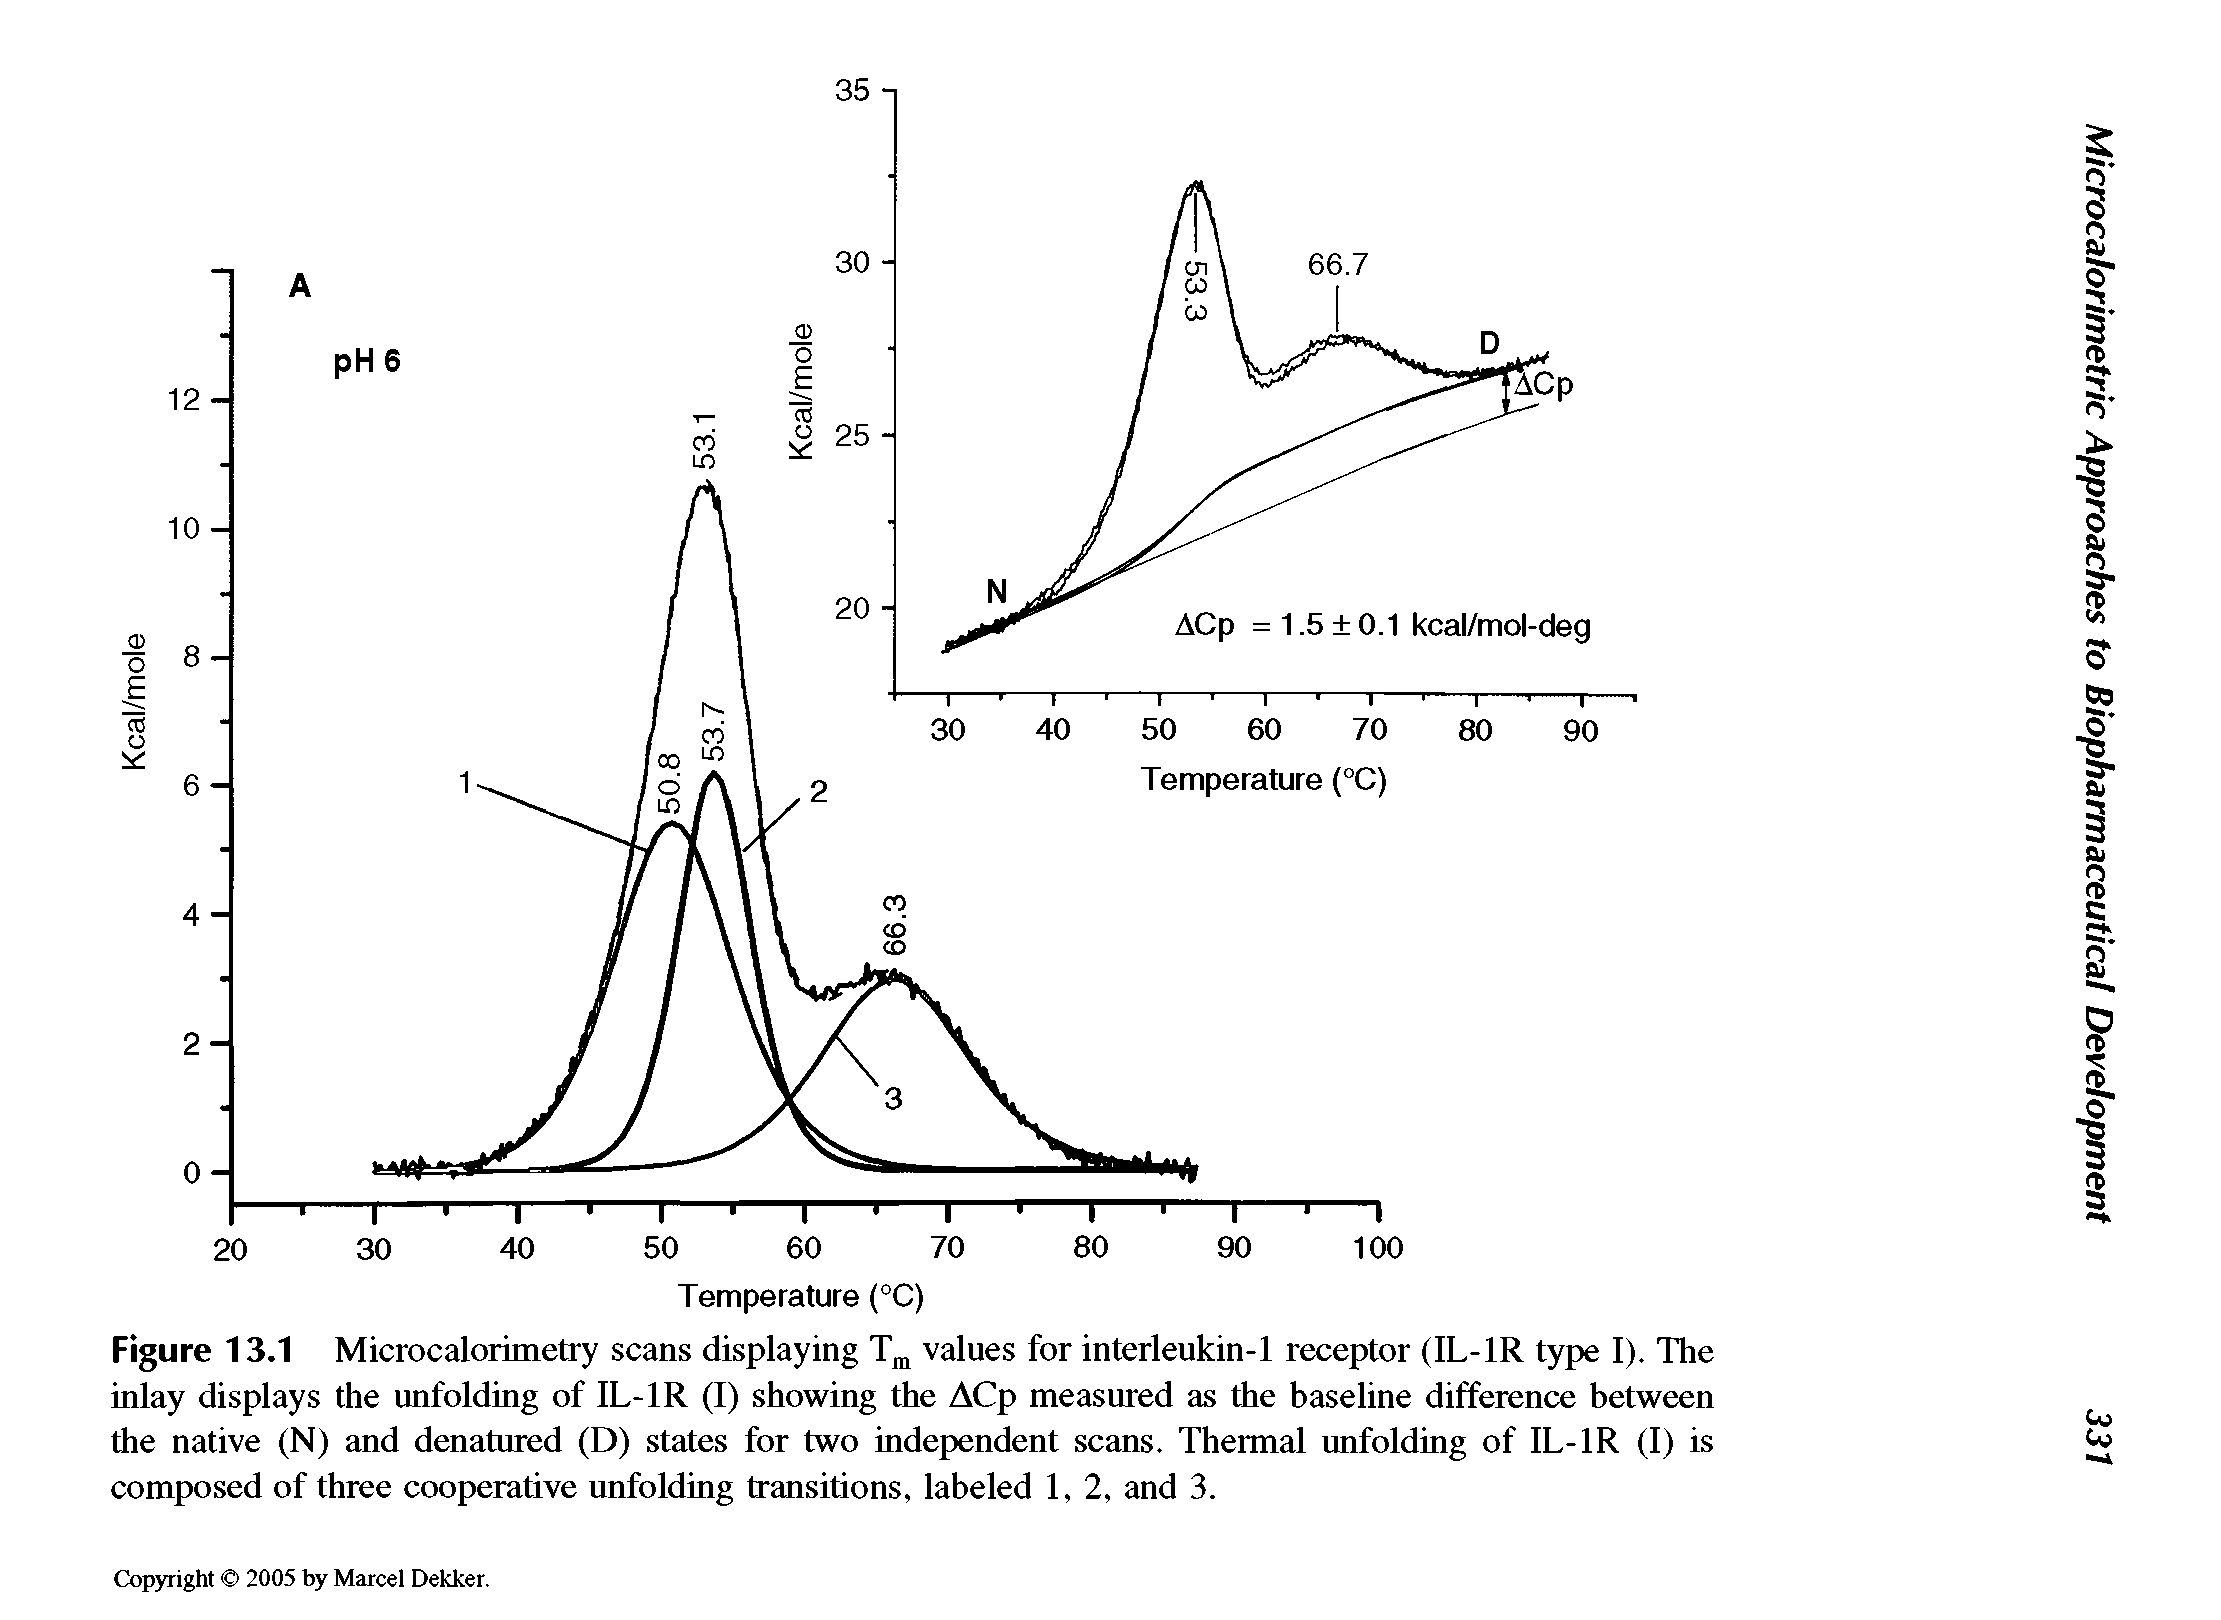 Figure 13.1 Microcalorimetry scans displaying Tm values for interleukin-1 receptor (IL-1R type I). The inlay displays the unfolding of IL-1R (I) showing the ACp measured as the baseline difference between the native (N) and denatured (D) states for two independent scans. Thermal unfolding of IL-1R (I) is composed of three cooperative unfolding transitions, labeled 1, 2, and 3.